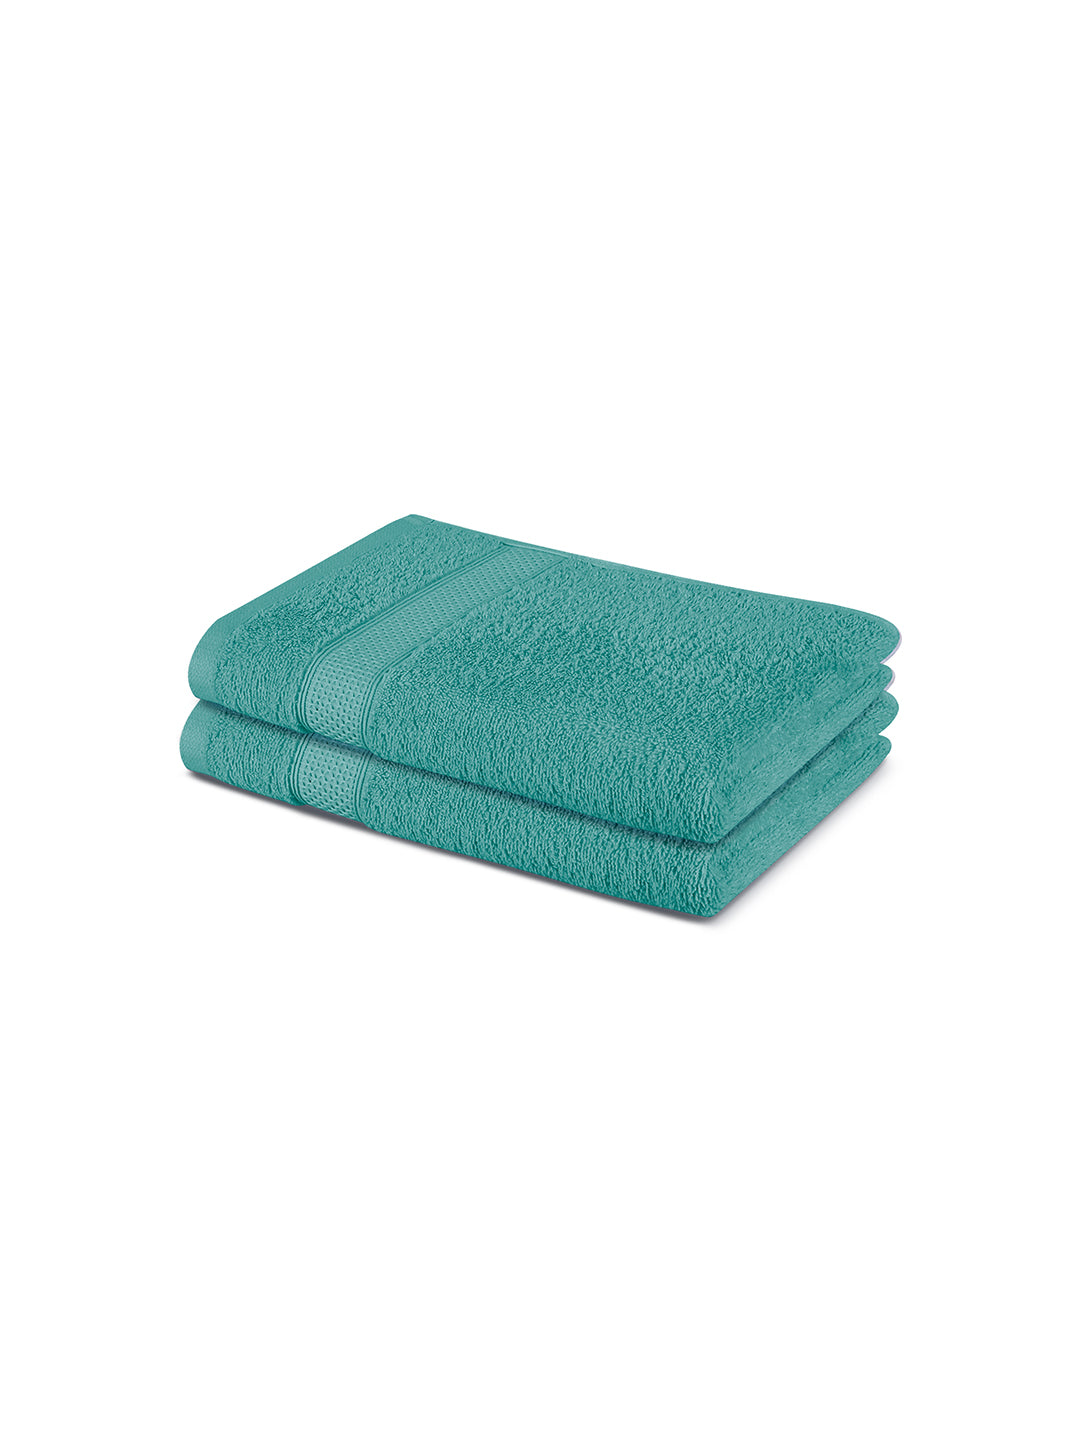 Elite Daily Soft Pack of 2 Hand Towels